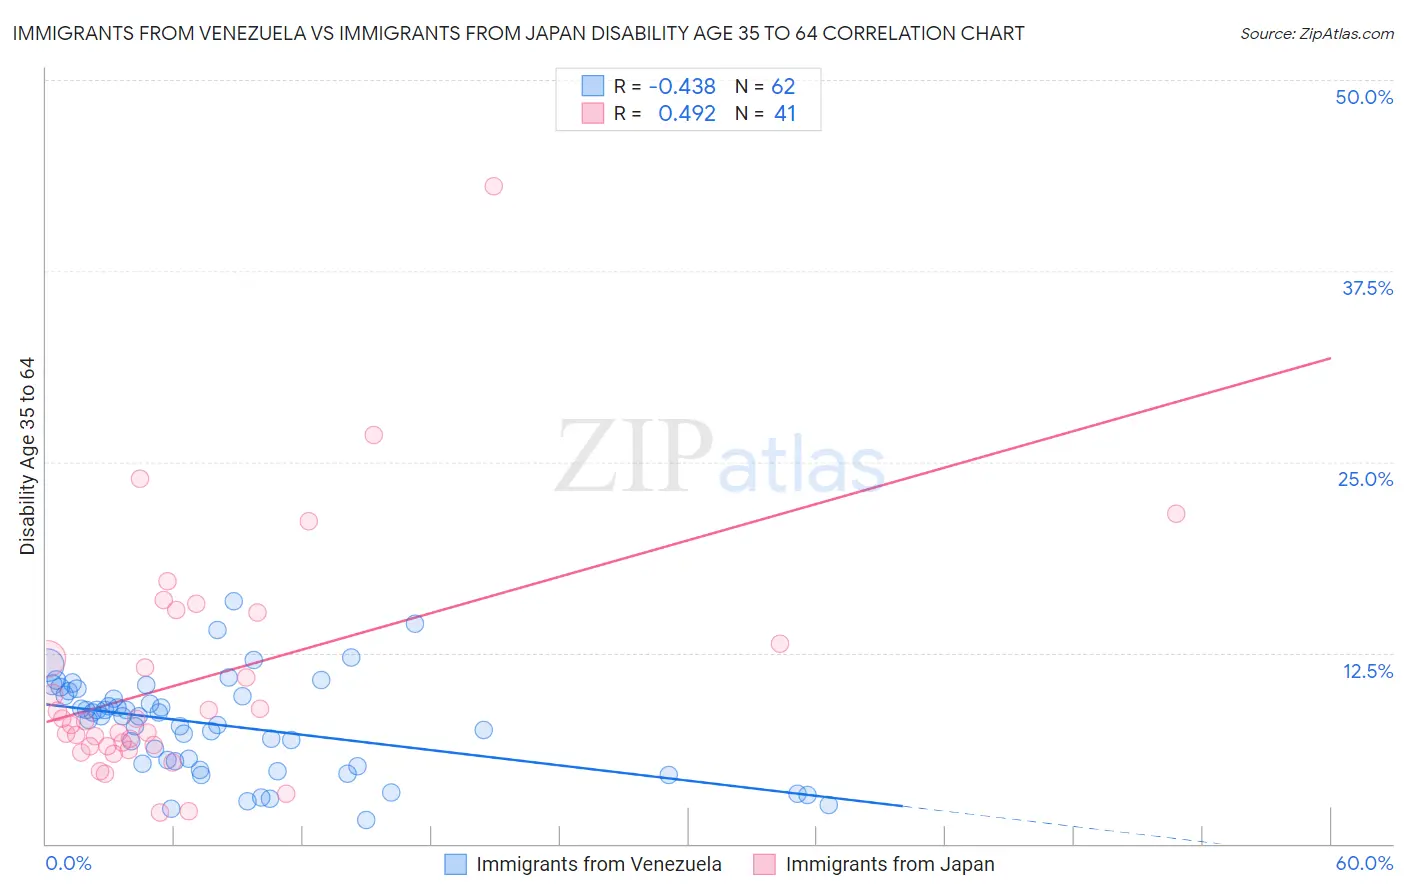 Immigrants from Venezuela vs Immigrants from Japan Disability Age 35 to 64